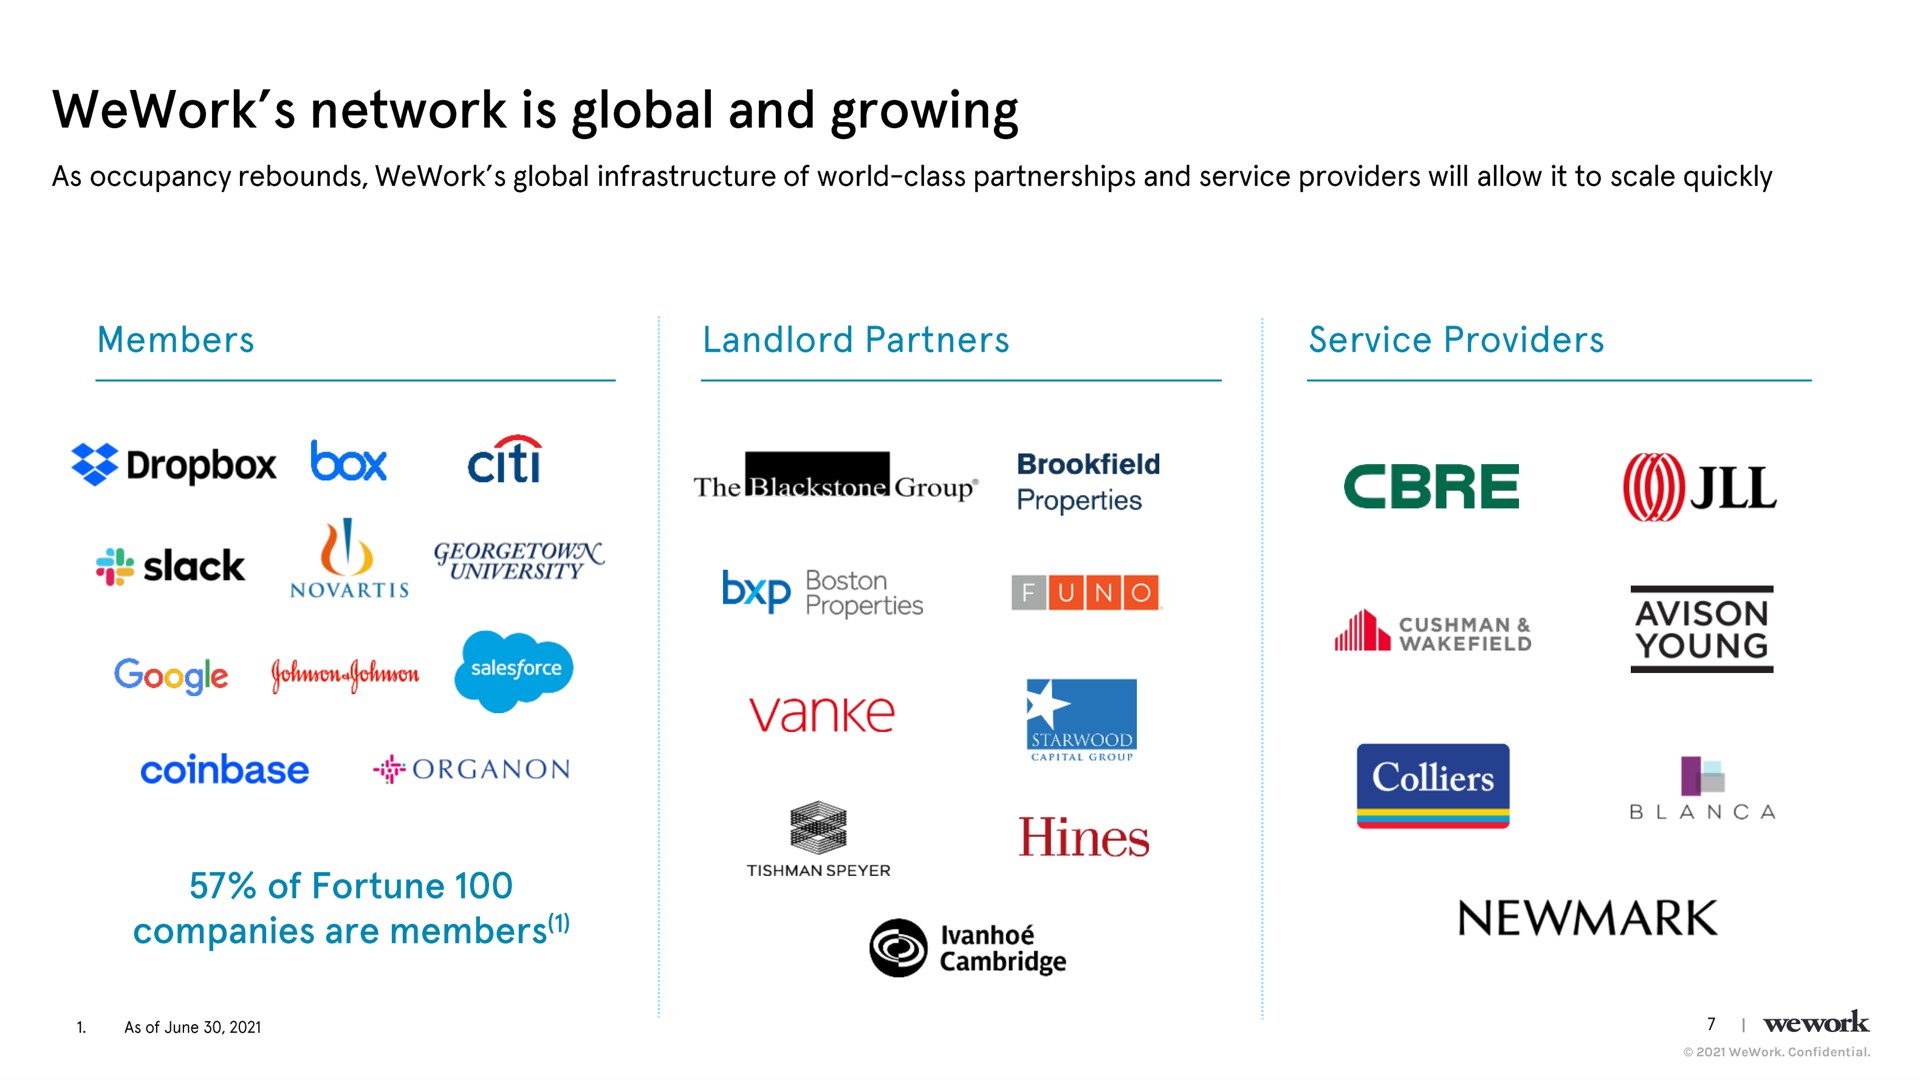 network is global and growing box of fortune companies are members on | WeWork